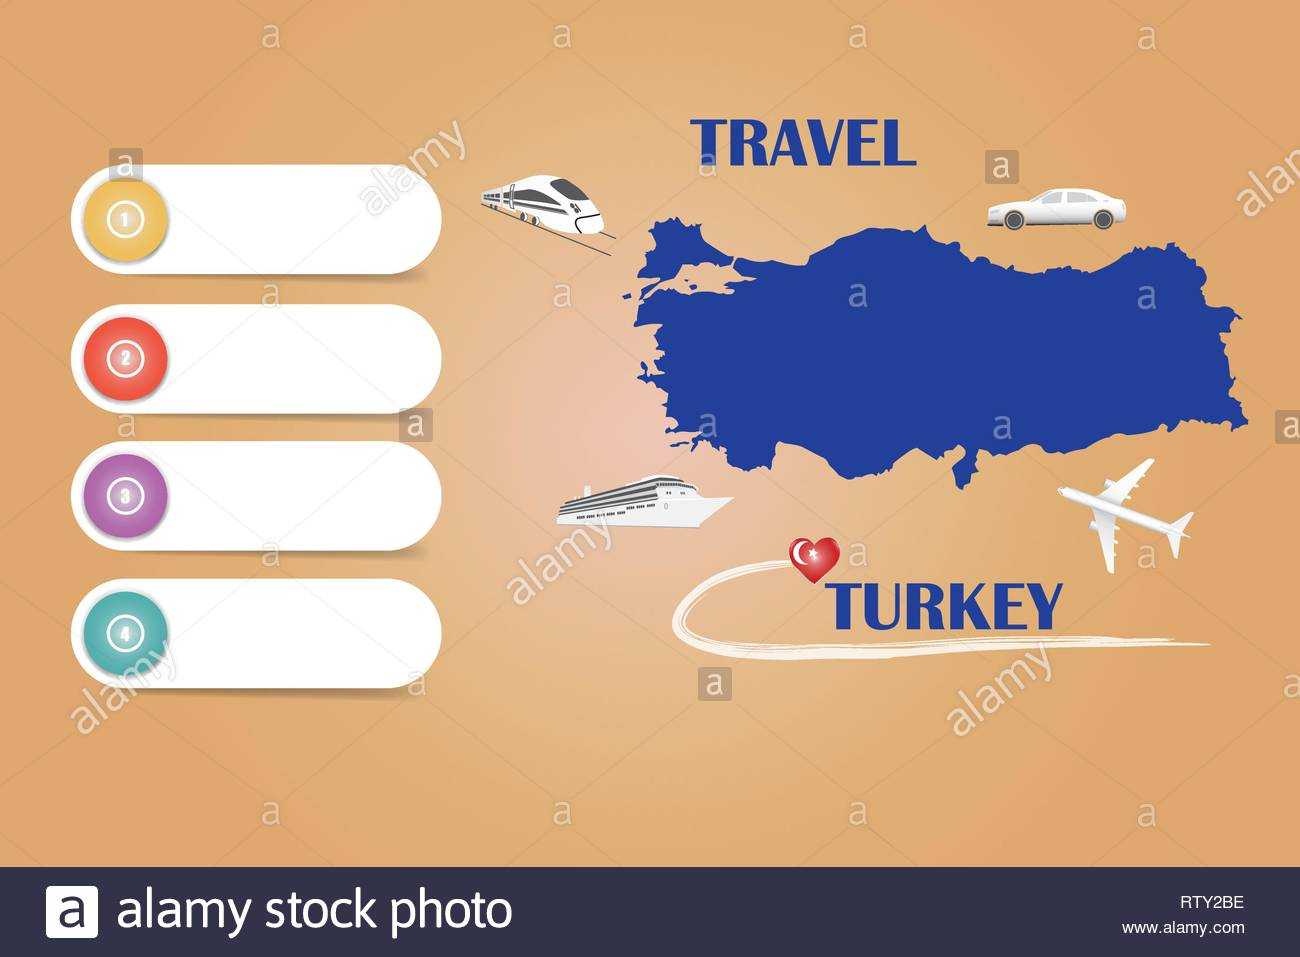 Travel Turkey Template Vector For Travel Agencies Etc With Blank Turkey Template